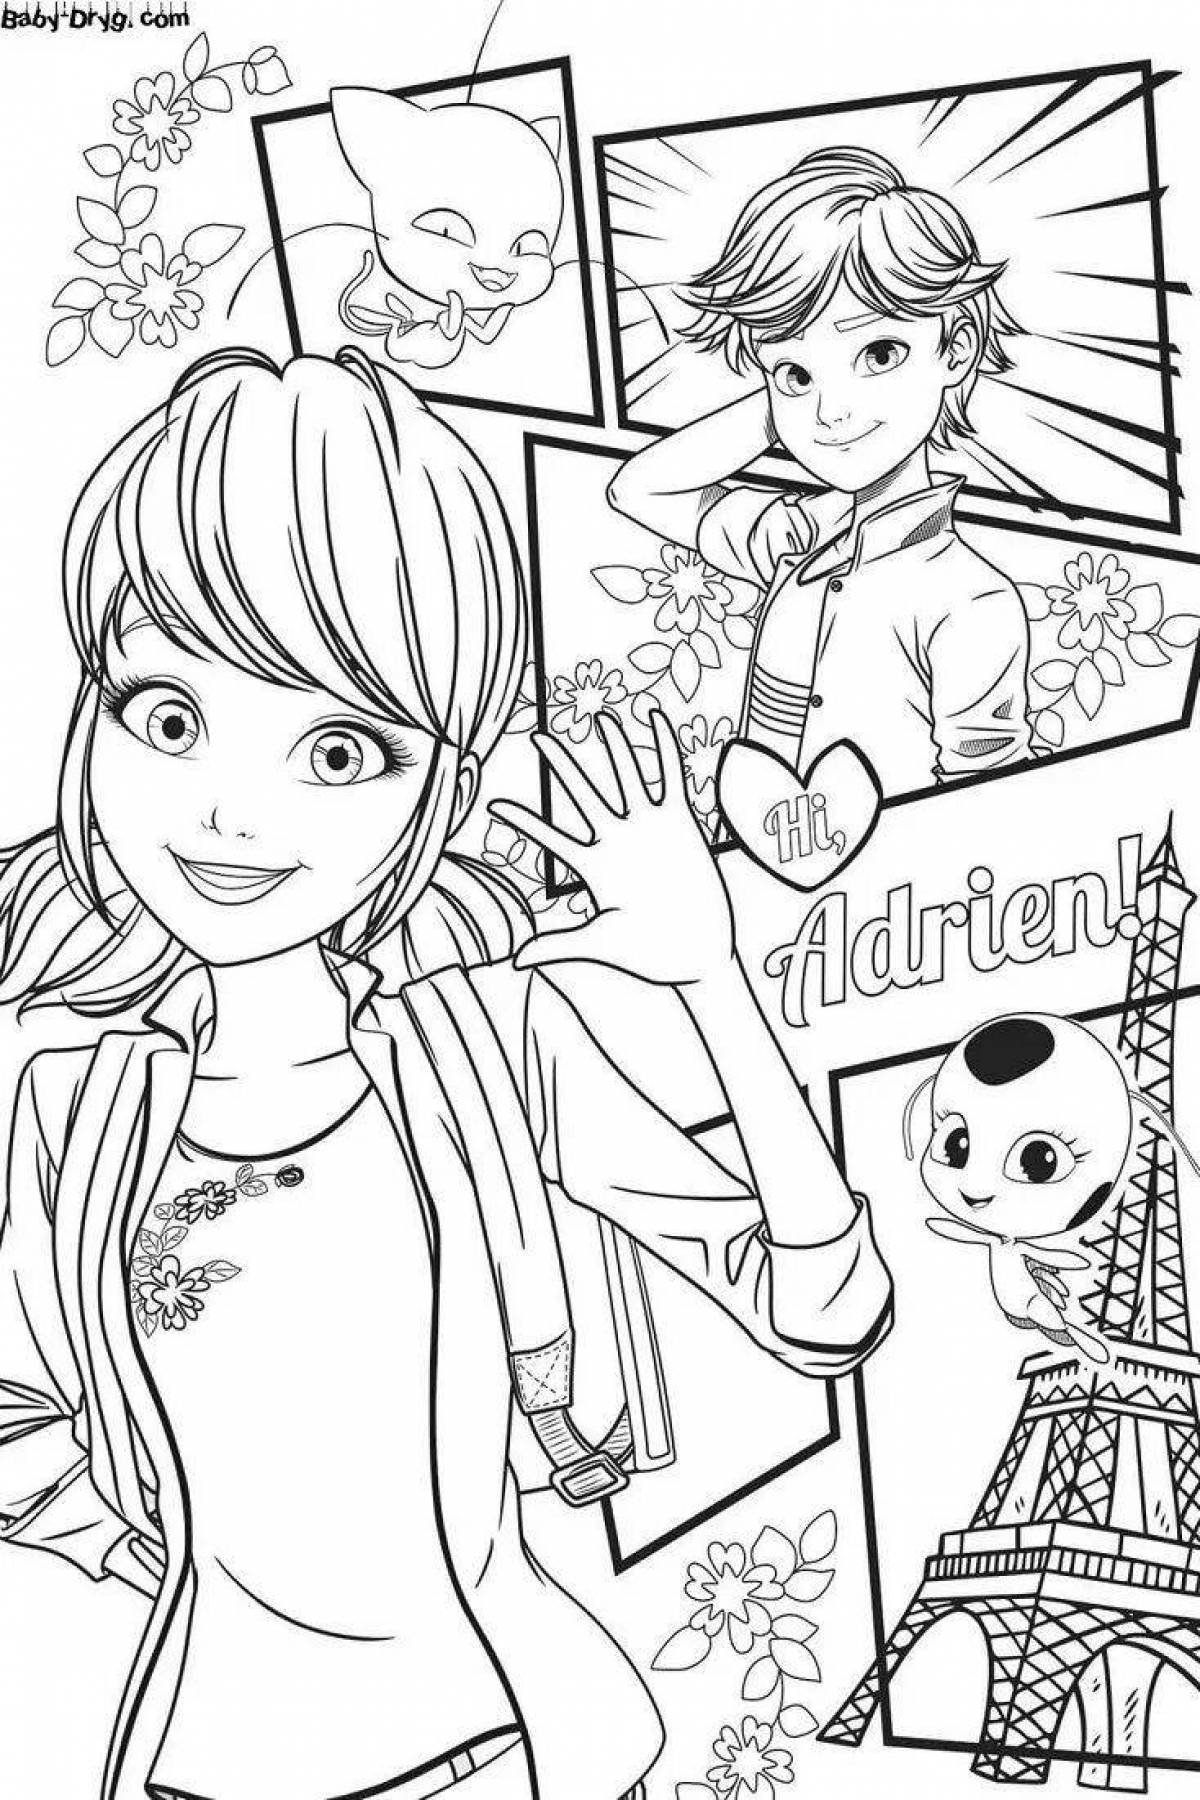 Lady bug's merry christmas coloring book